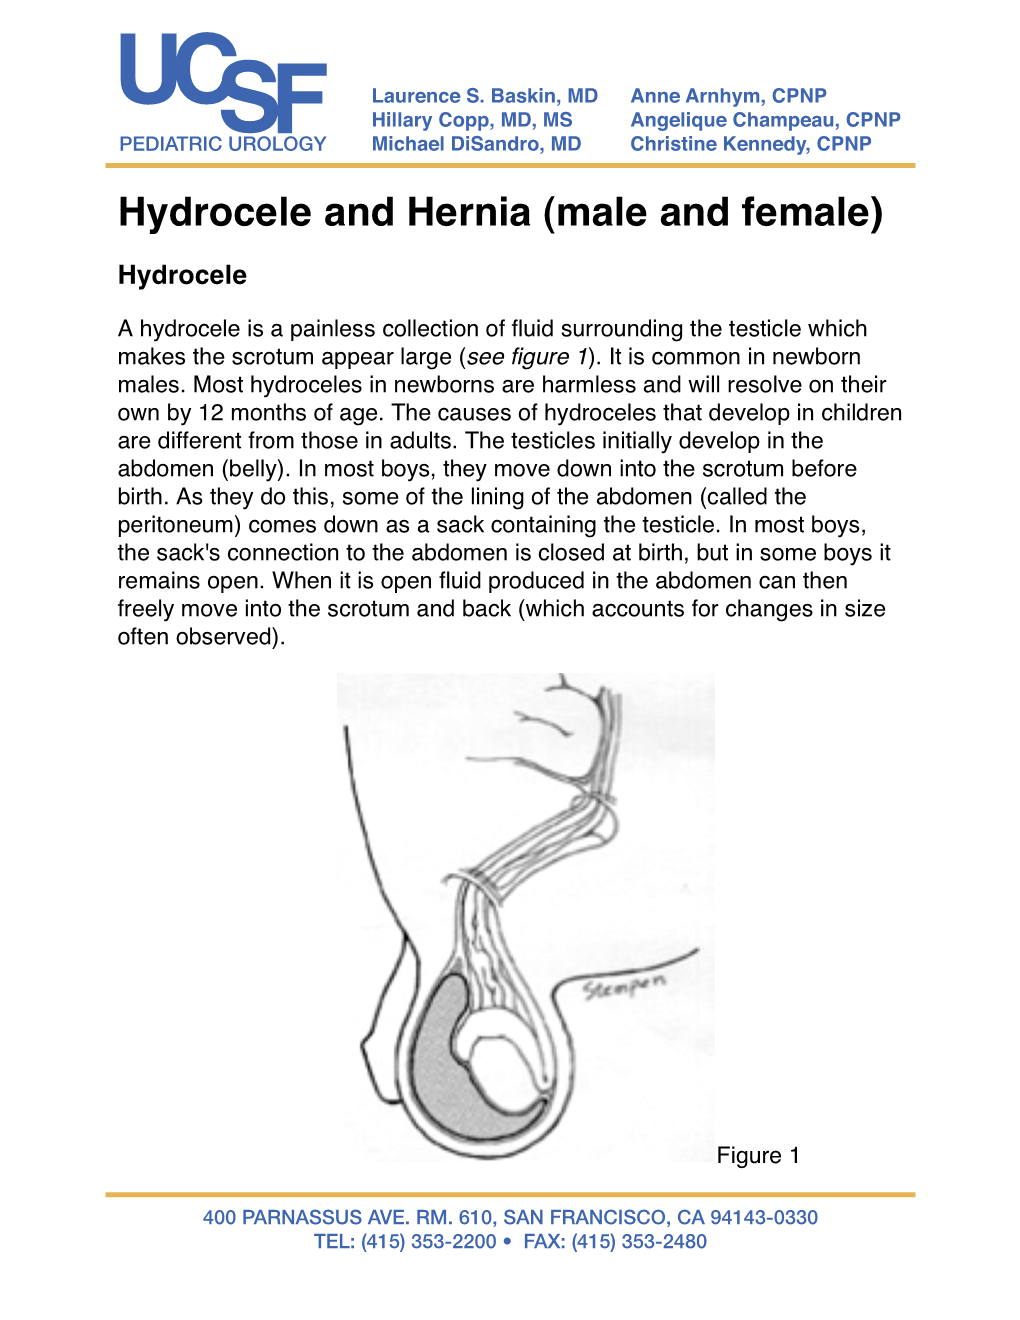 Hydrocele and Hernia (Male and Female)